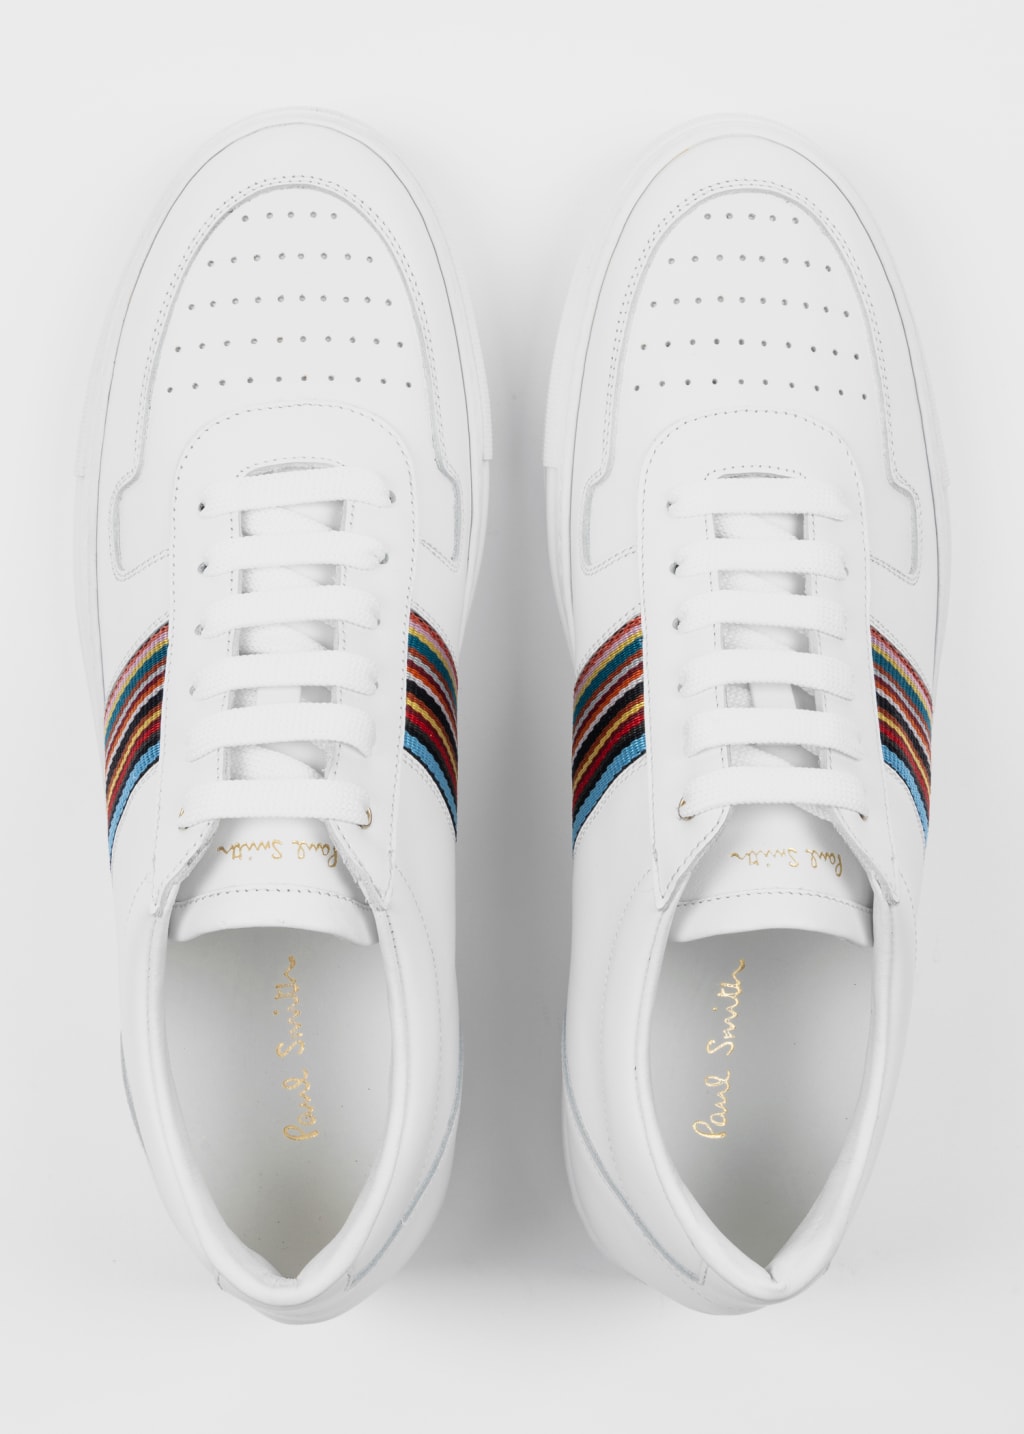 Pair View - White Leather 'Fermi' Trainers Paul Smith